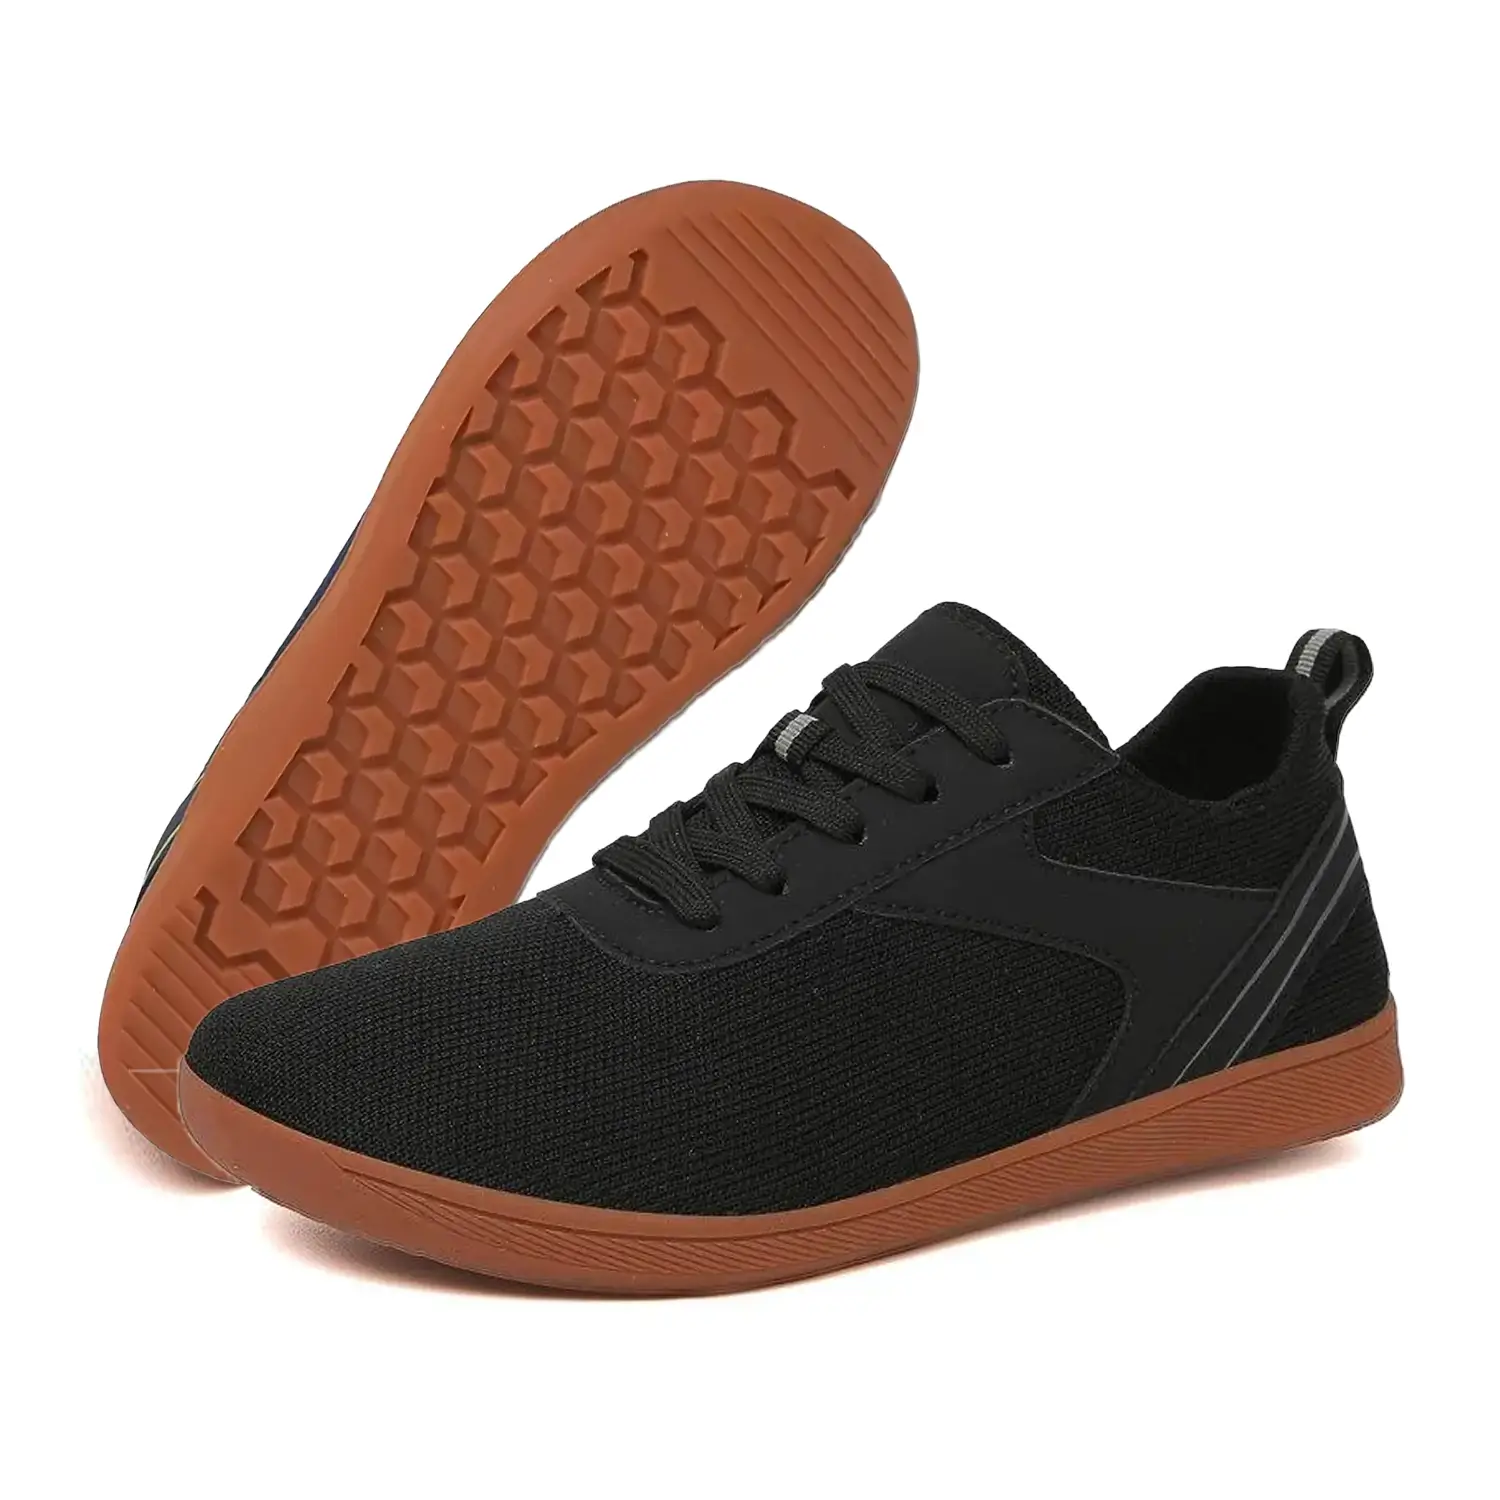 Native - Sneaker Barefoot Shoes (Unisex) (1+1 FREE)